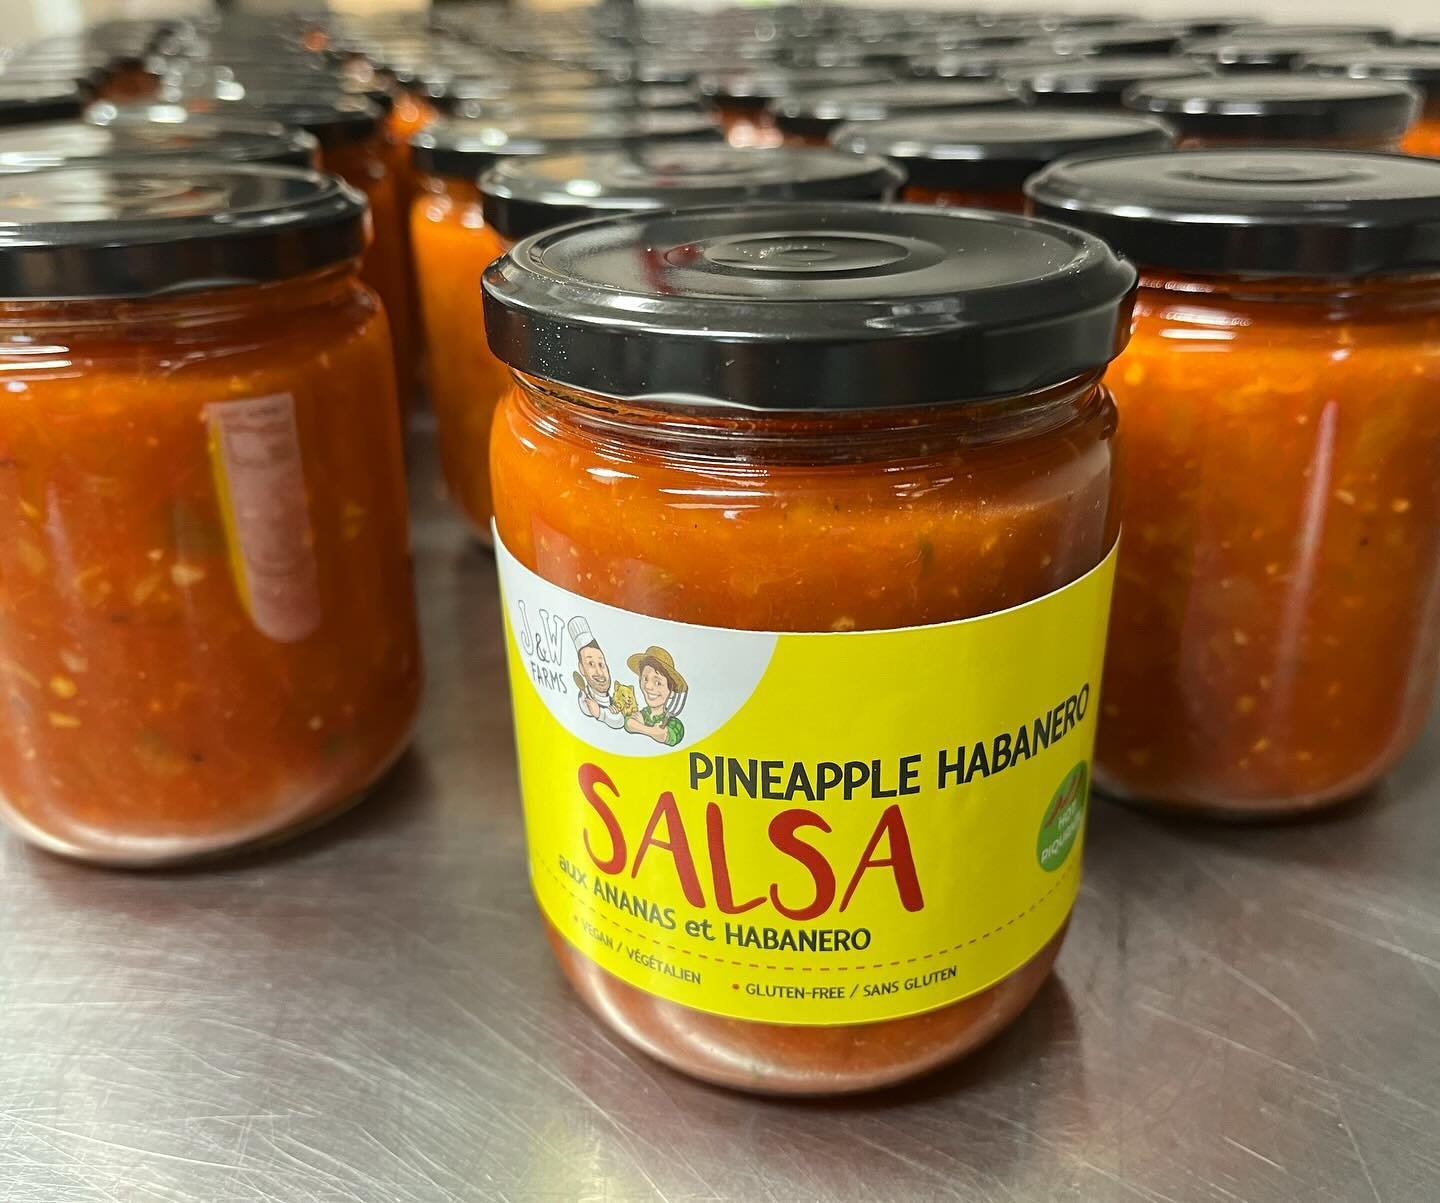 Do you like it HOT? Our Pineapple Habanero Salsa won&rsquo;t disappoint! Very spicy, super flavourful, great for your fish tacos 🌮